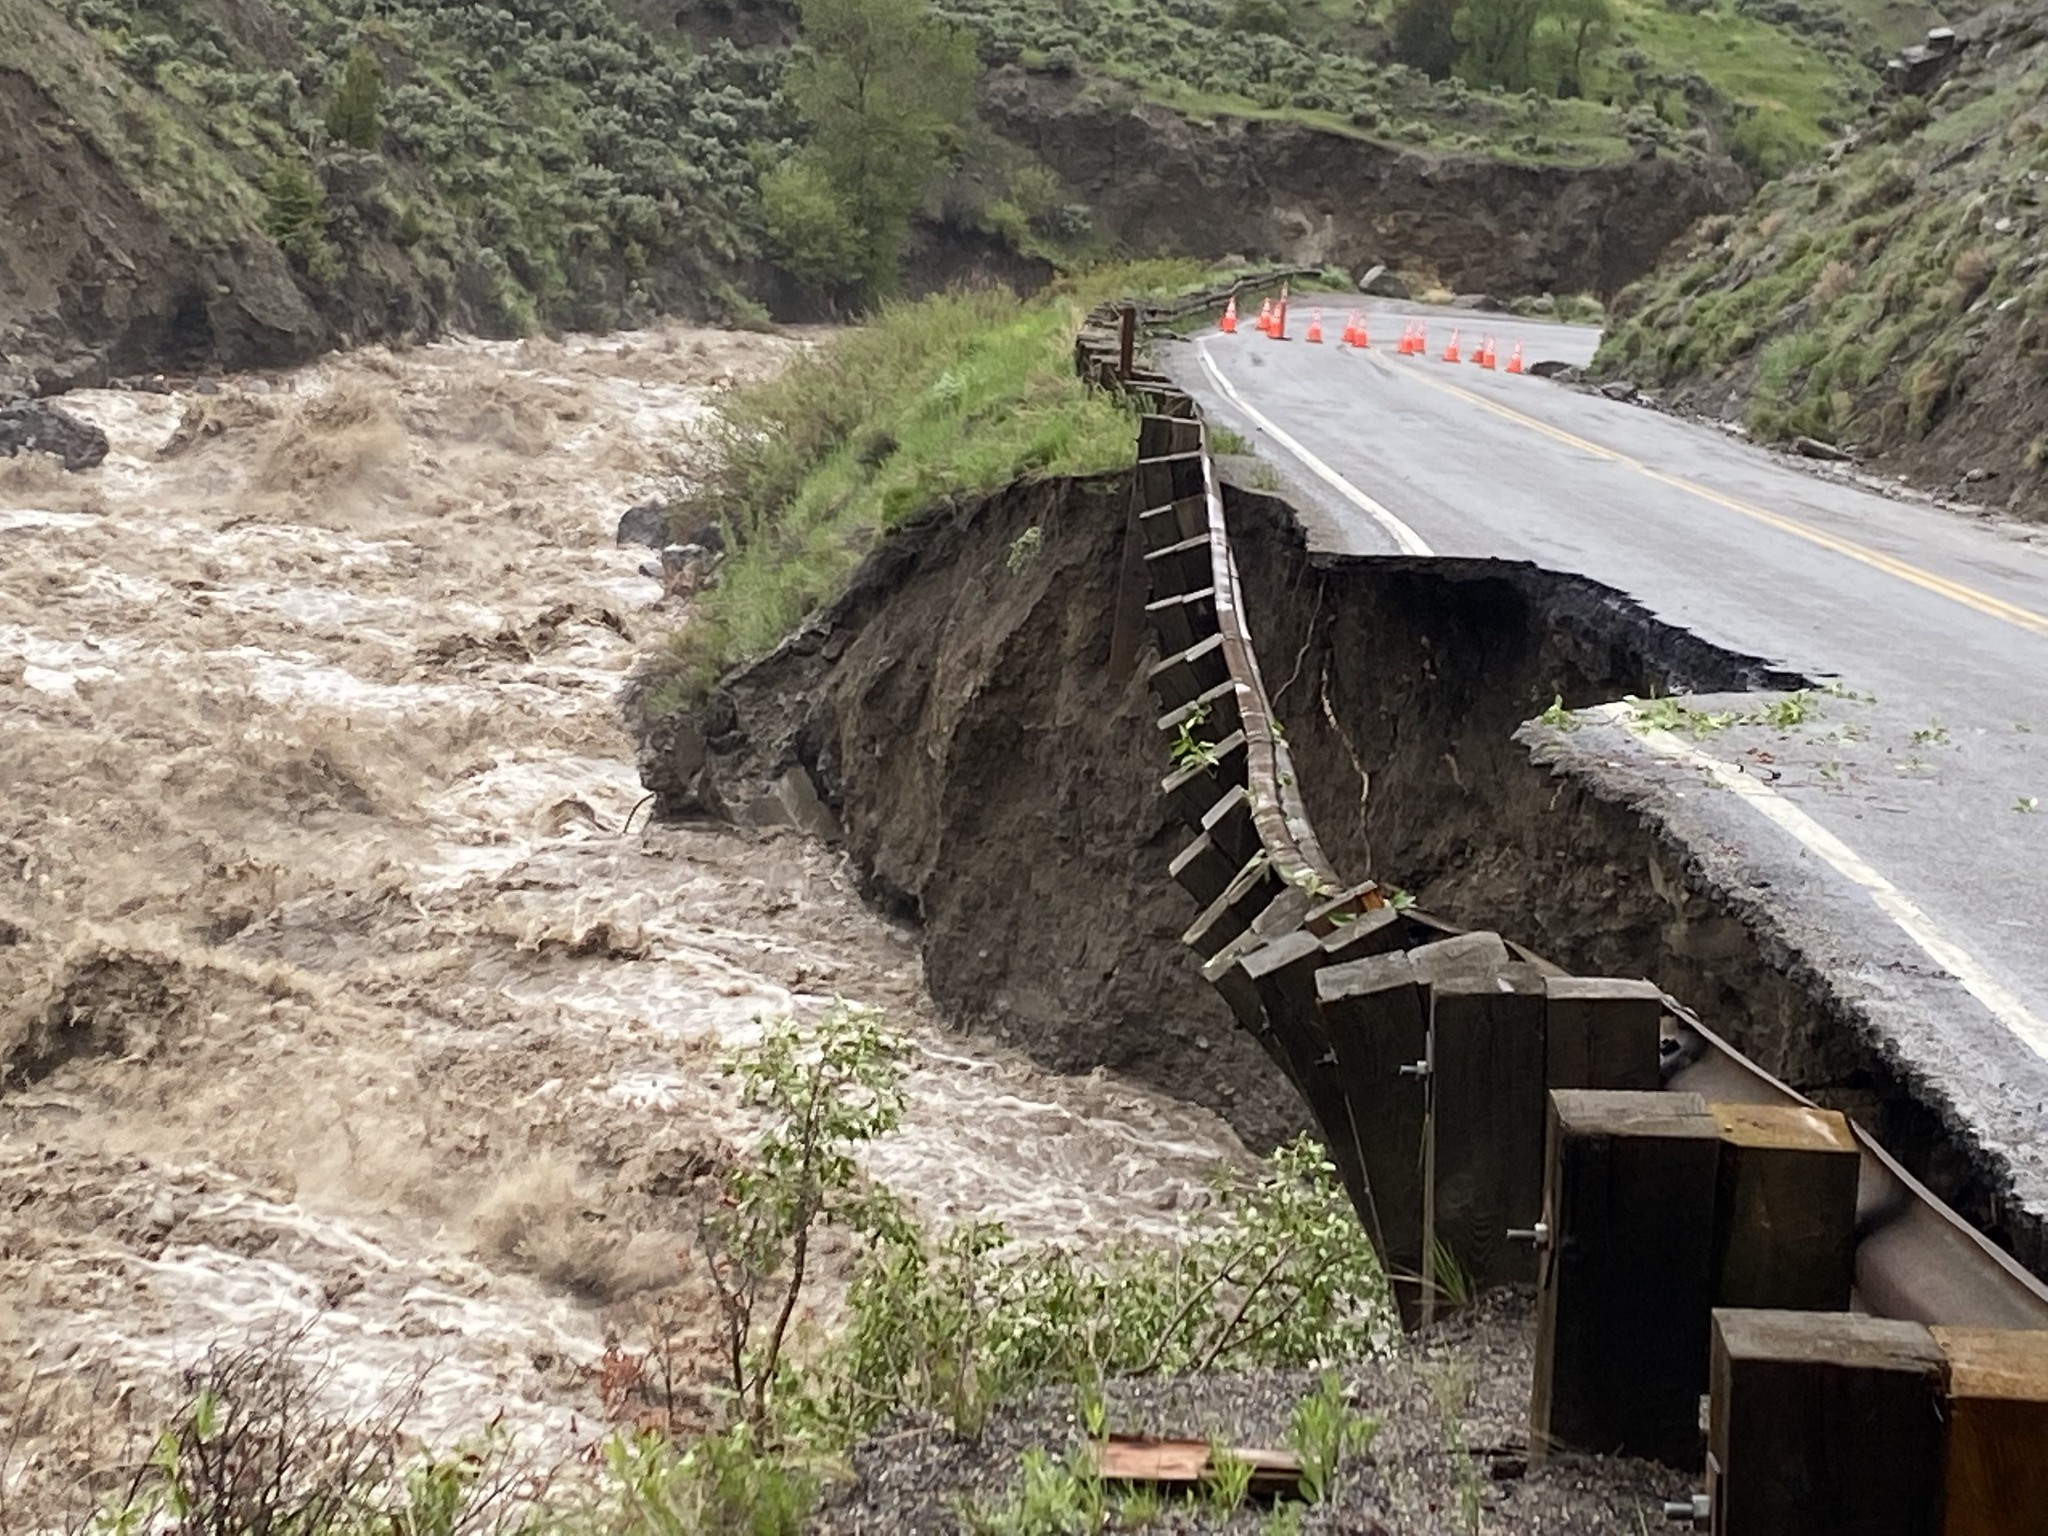 Yellowstone National Park Is Entirely Closed Due to Damage From “Unprecedented Rainfall”